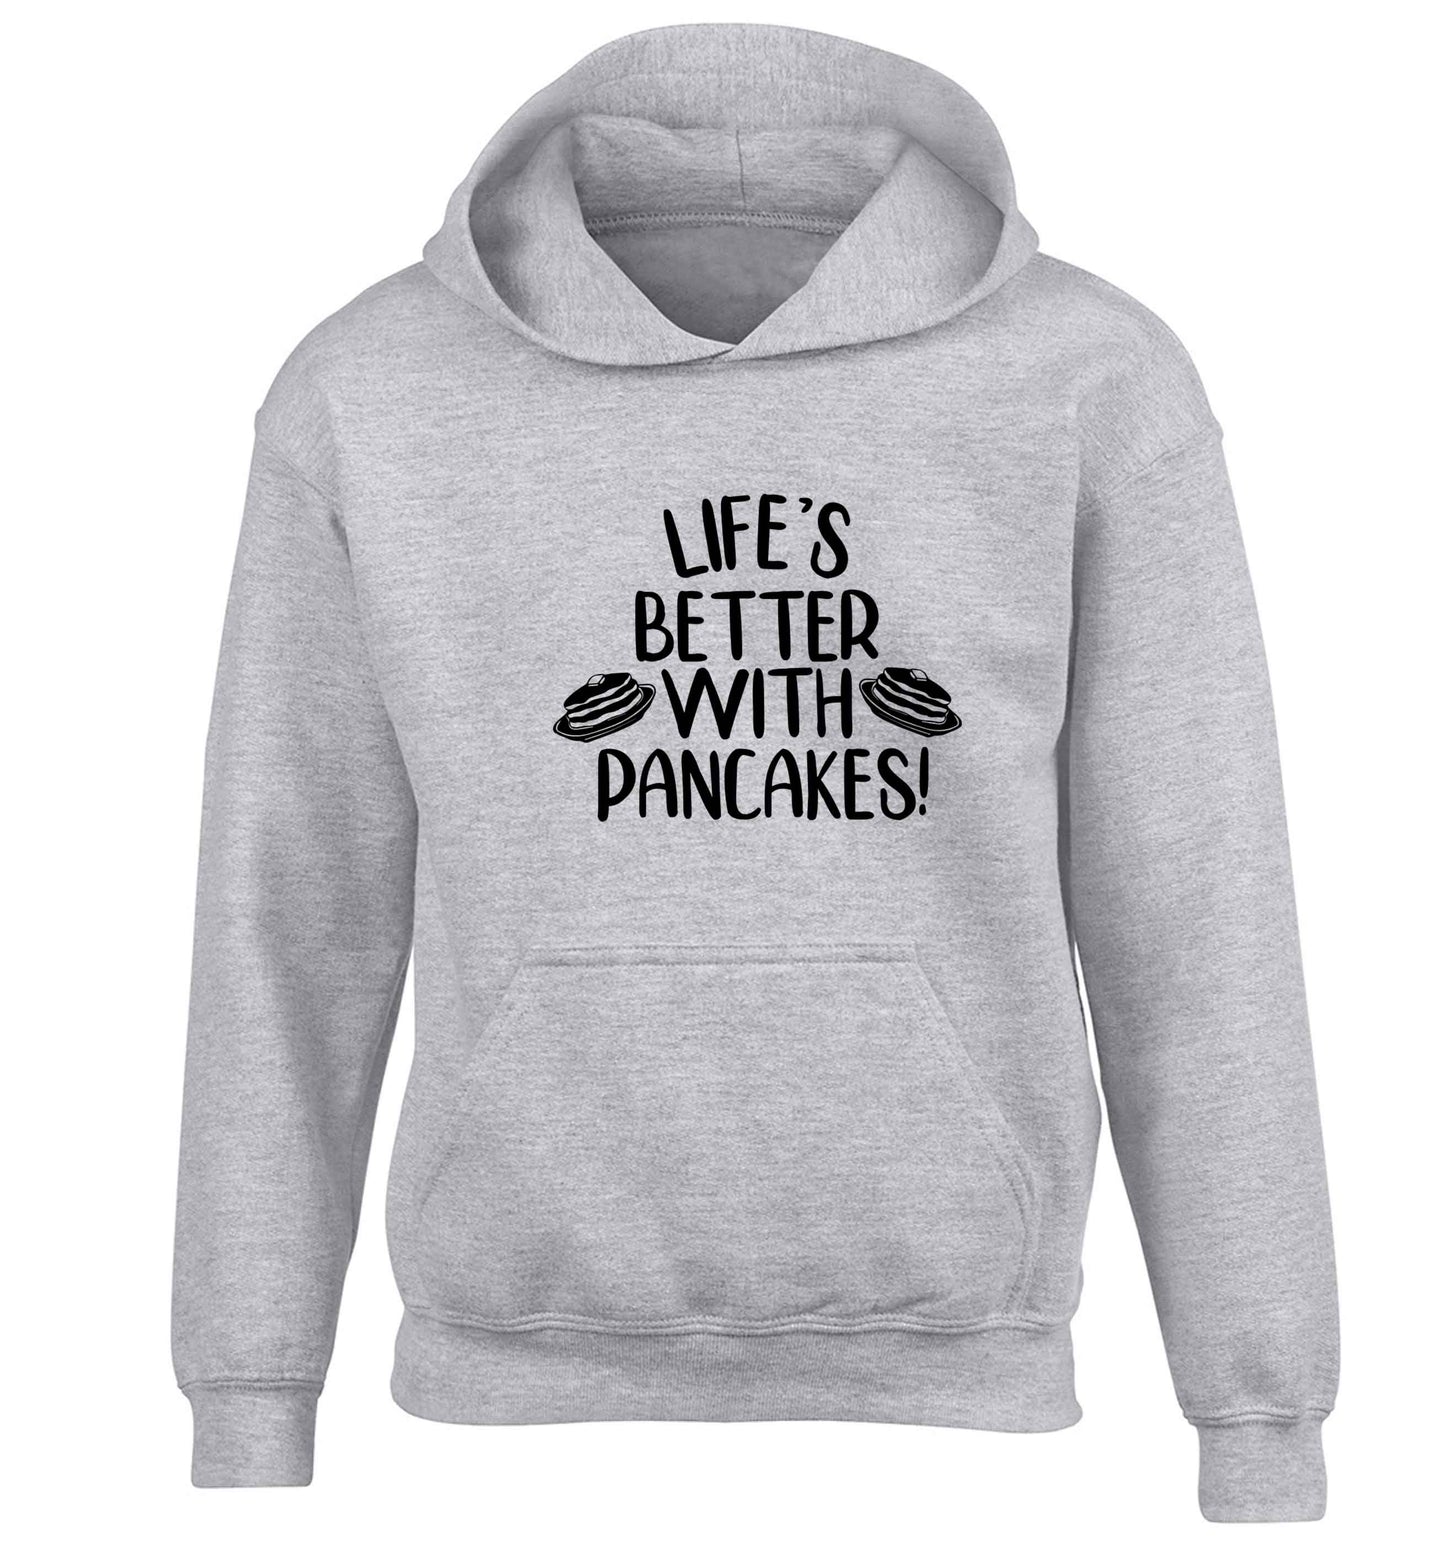 Life's better with pancakes children's grey hoodie 12-13 Years